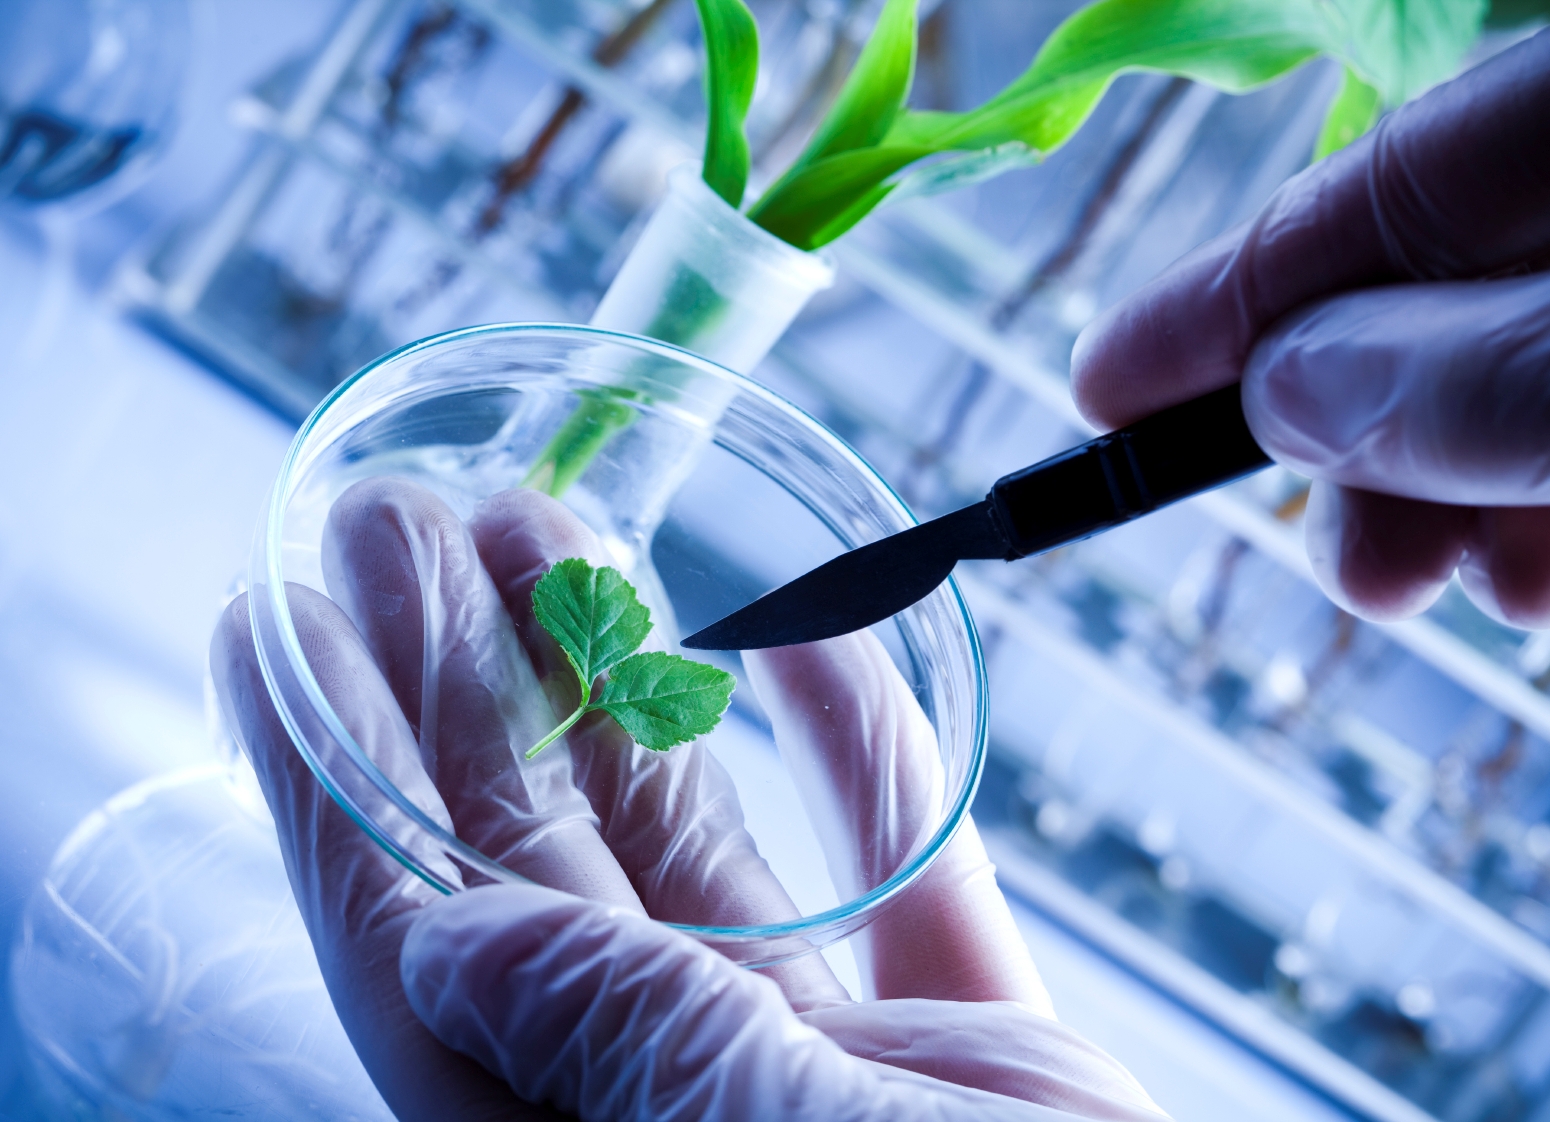 India aims for at least 1,500 Biotech startups Odisha News Insight